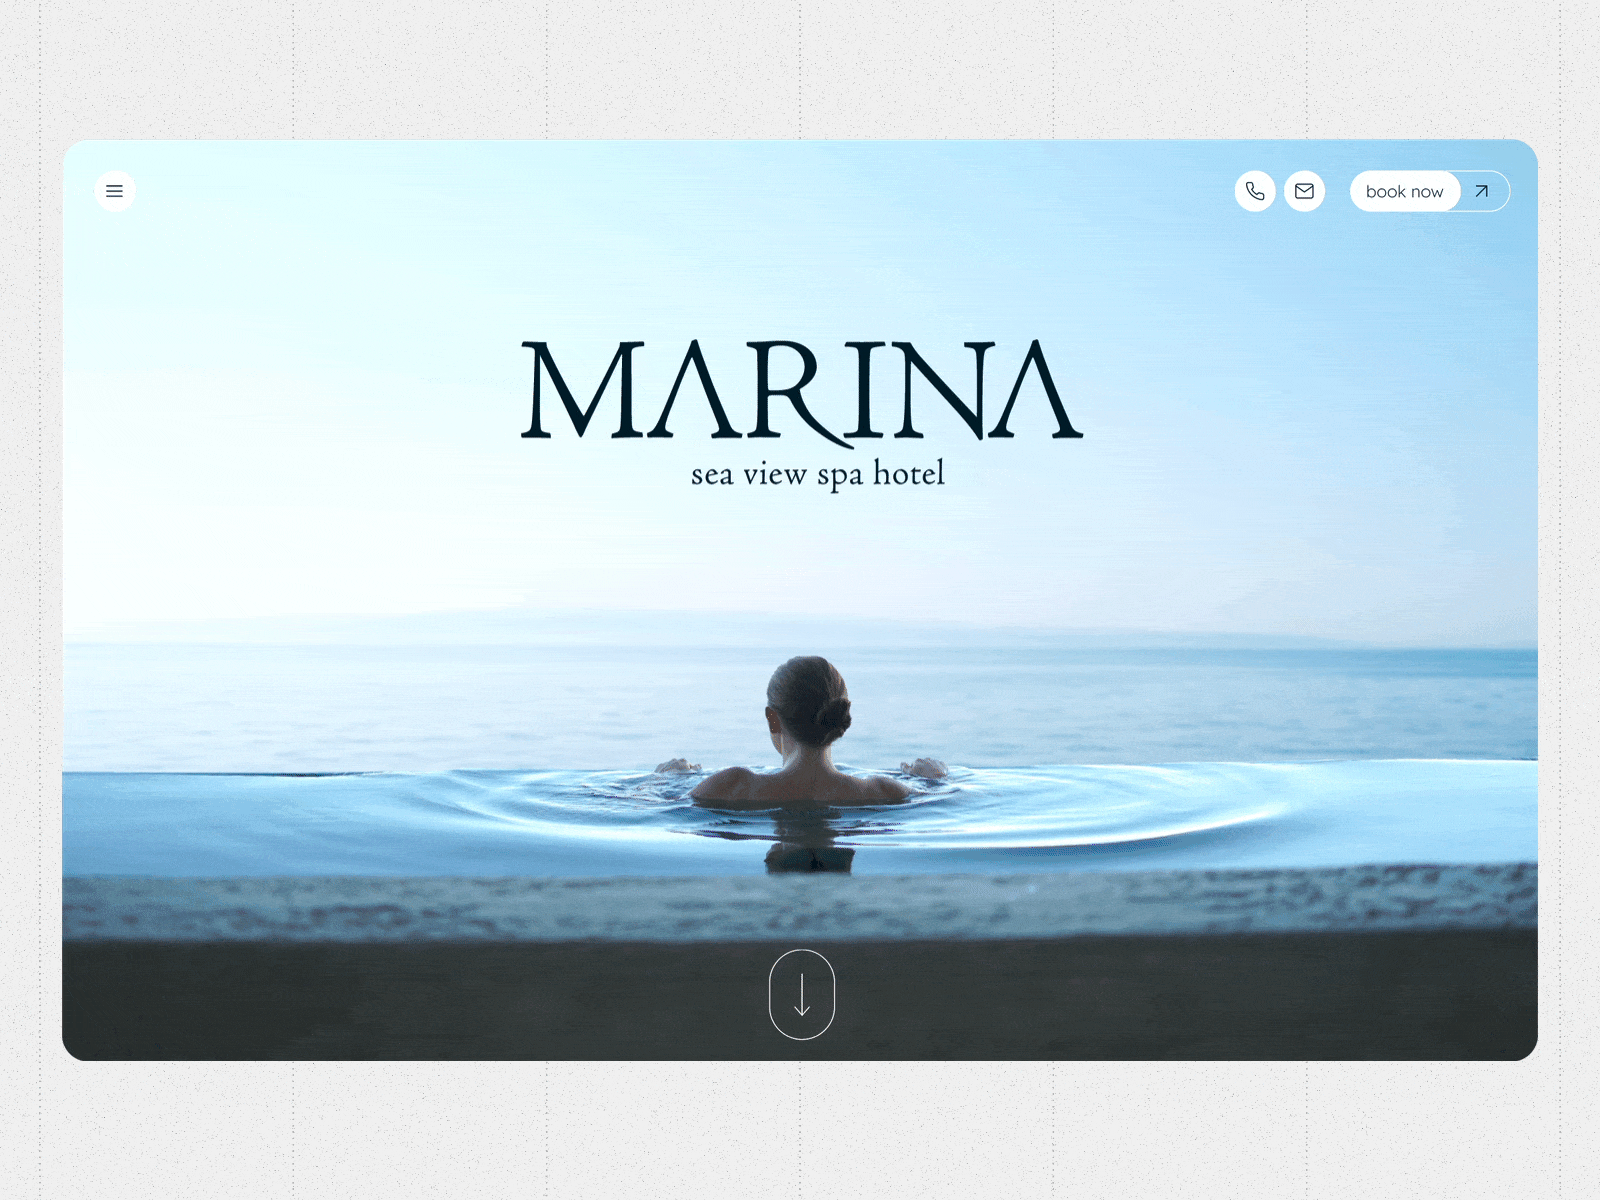 Marina — luxury sea view spa hotel website welcome experience animation branding design figma hero section home page hospitality hotel landing page logo sea spa hotel ui animation vacation warmup web design website weekly warm up welcome welcome experience